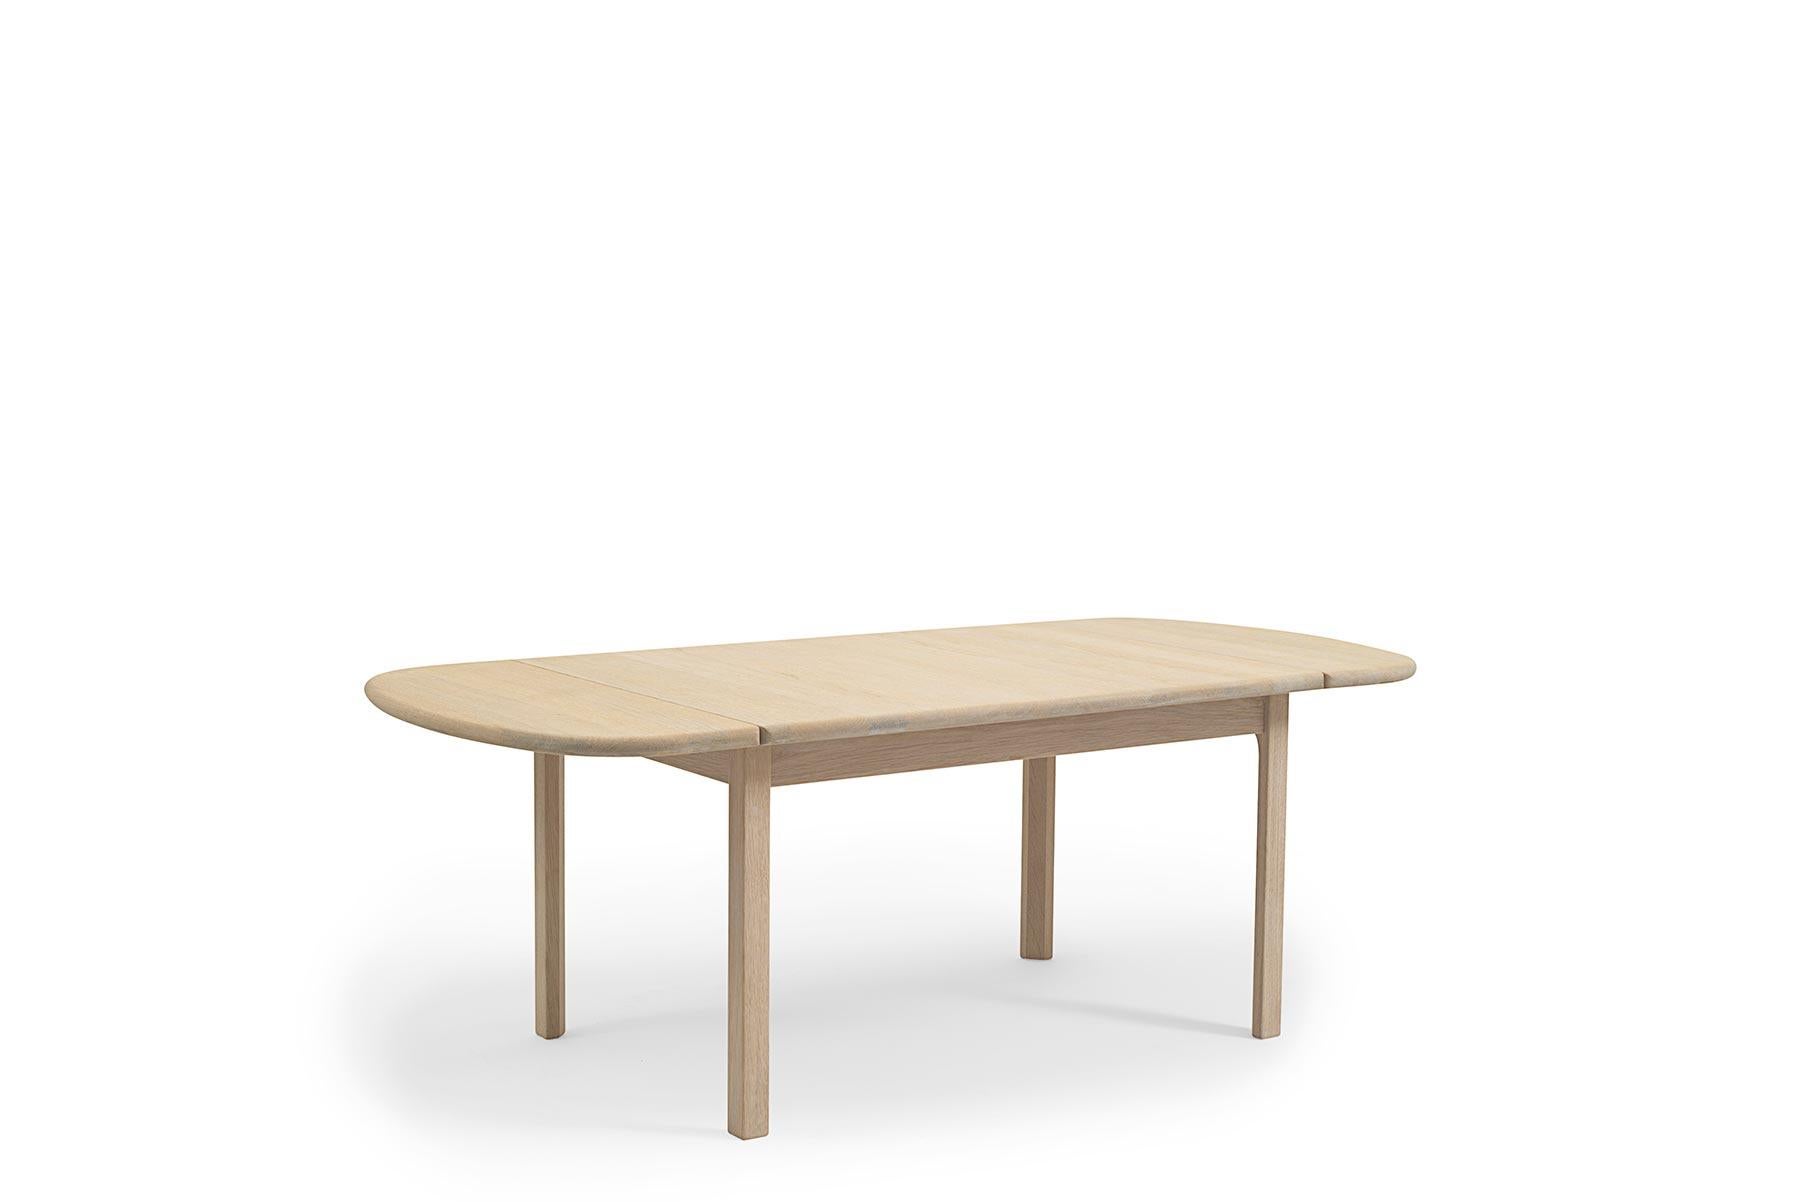 Danish Hans Wegner GE - 82/85 Coffee Table, Lacquered Beech For Sale